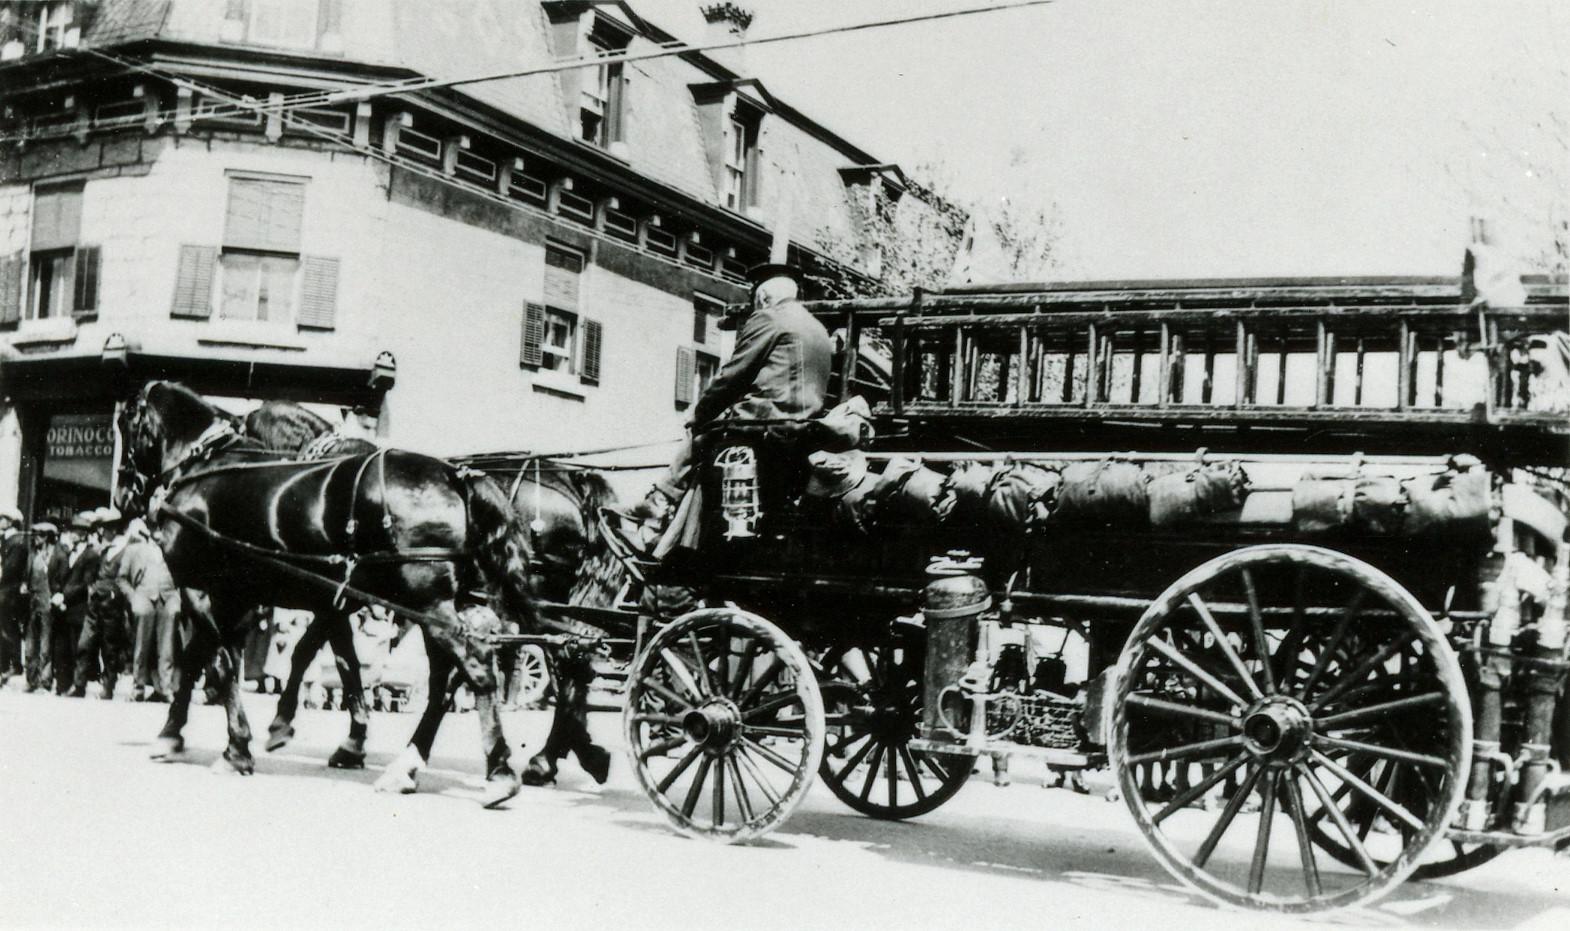 This horse drawn wagon pulls the St. Marys Fire Brigade’s hooks and ladders.